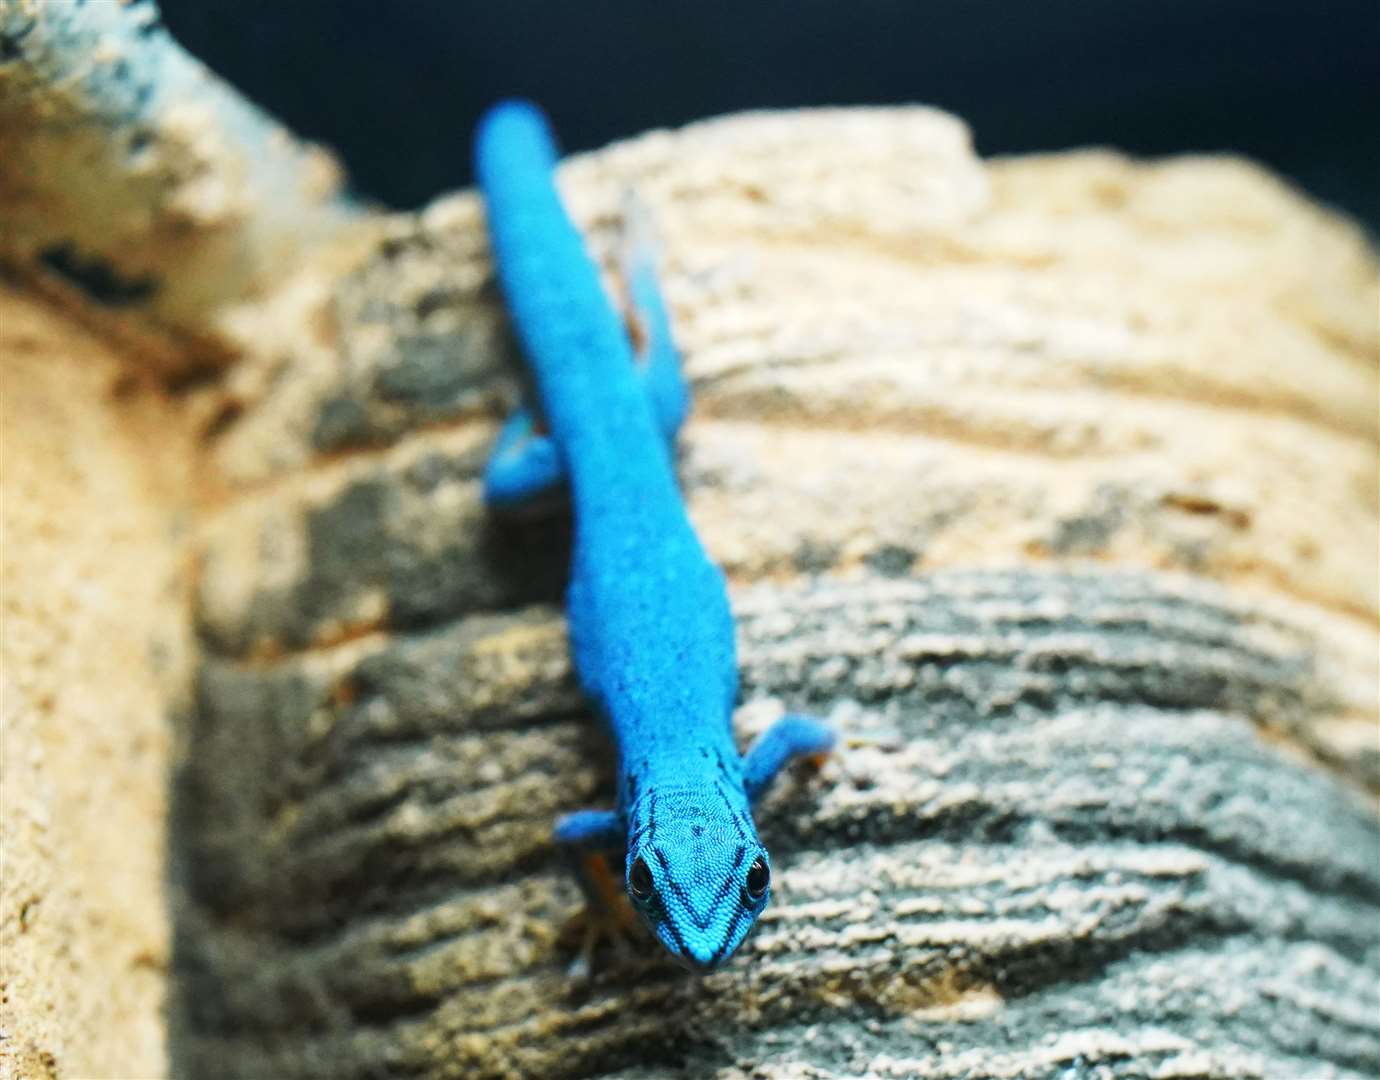 A turquoise dwarf gecko, one of the species threatened by the pet trade (Jonathan Brady/PA)